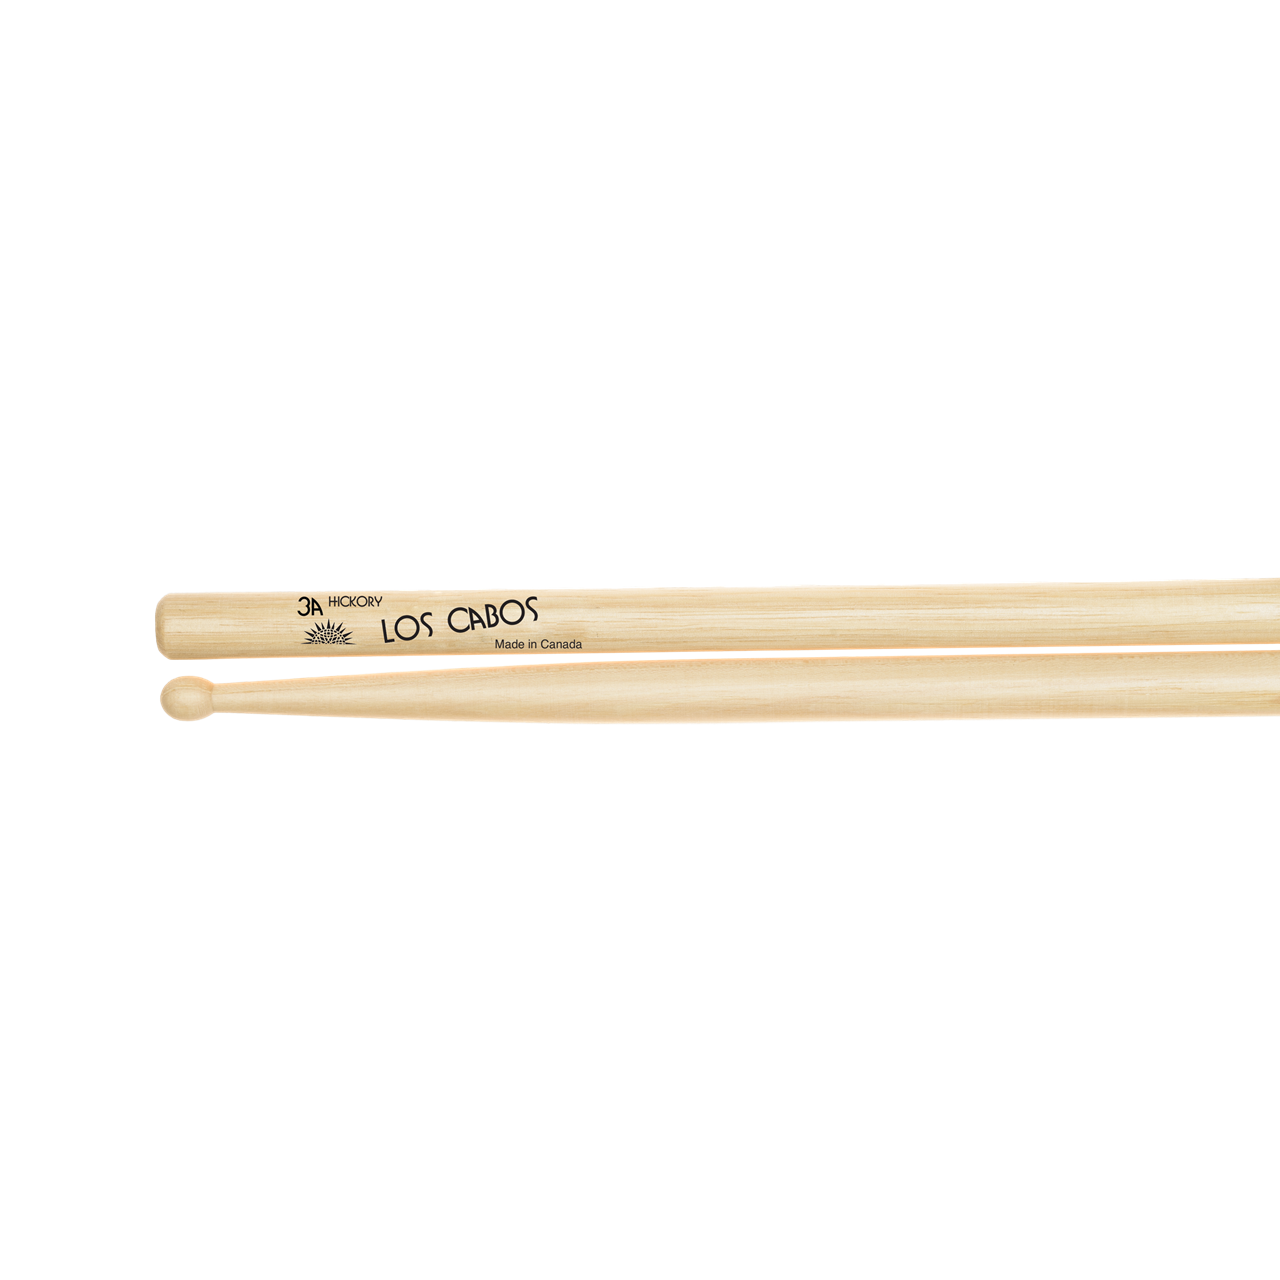 Los Cabos Drumstick 3A White Hickory